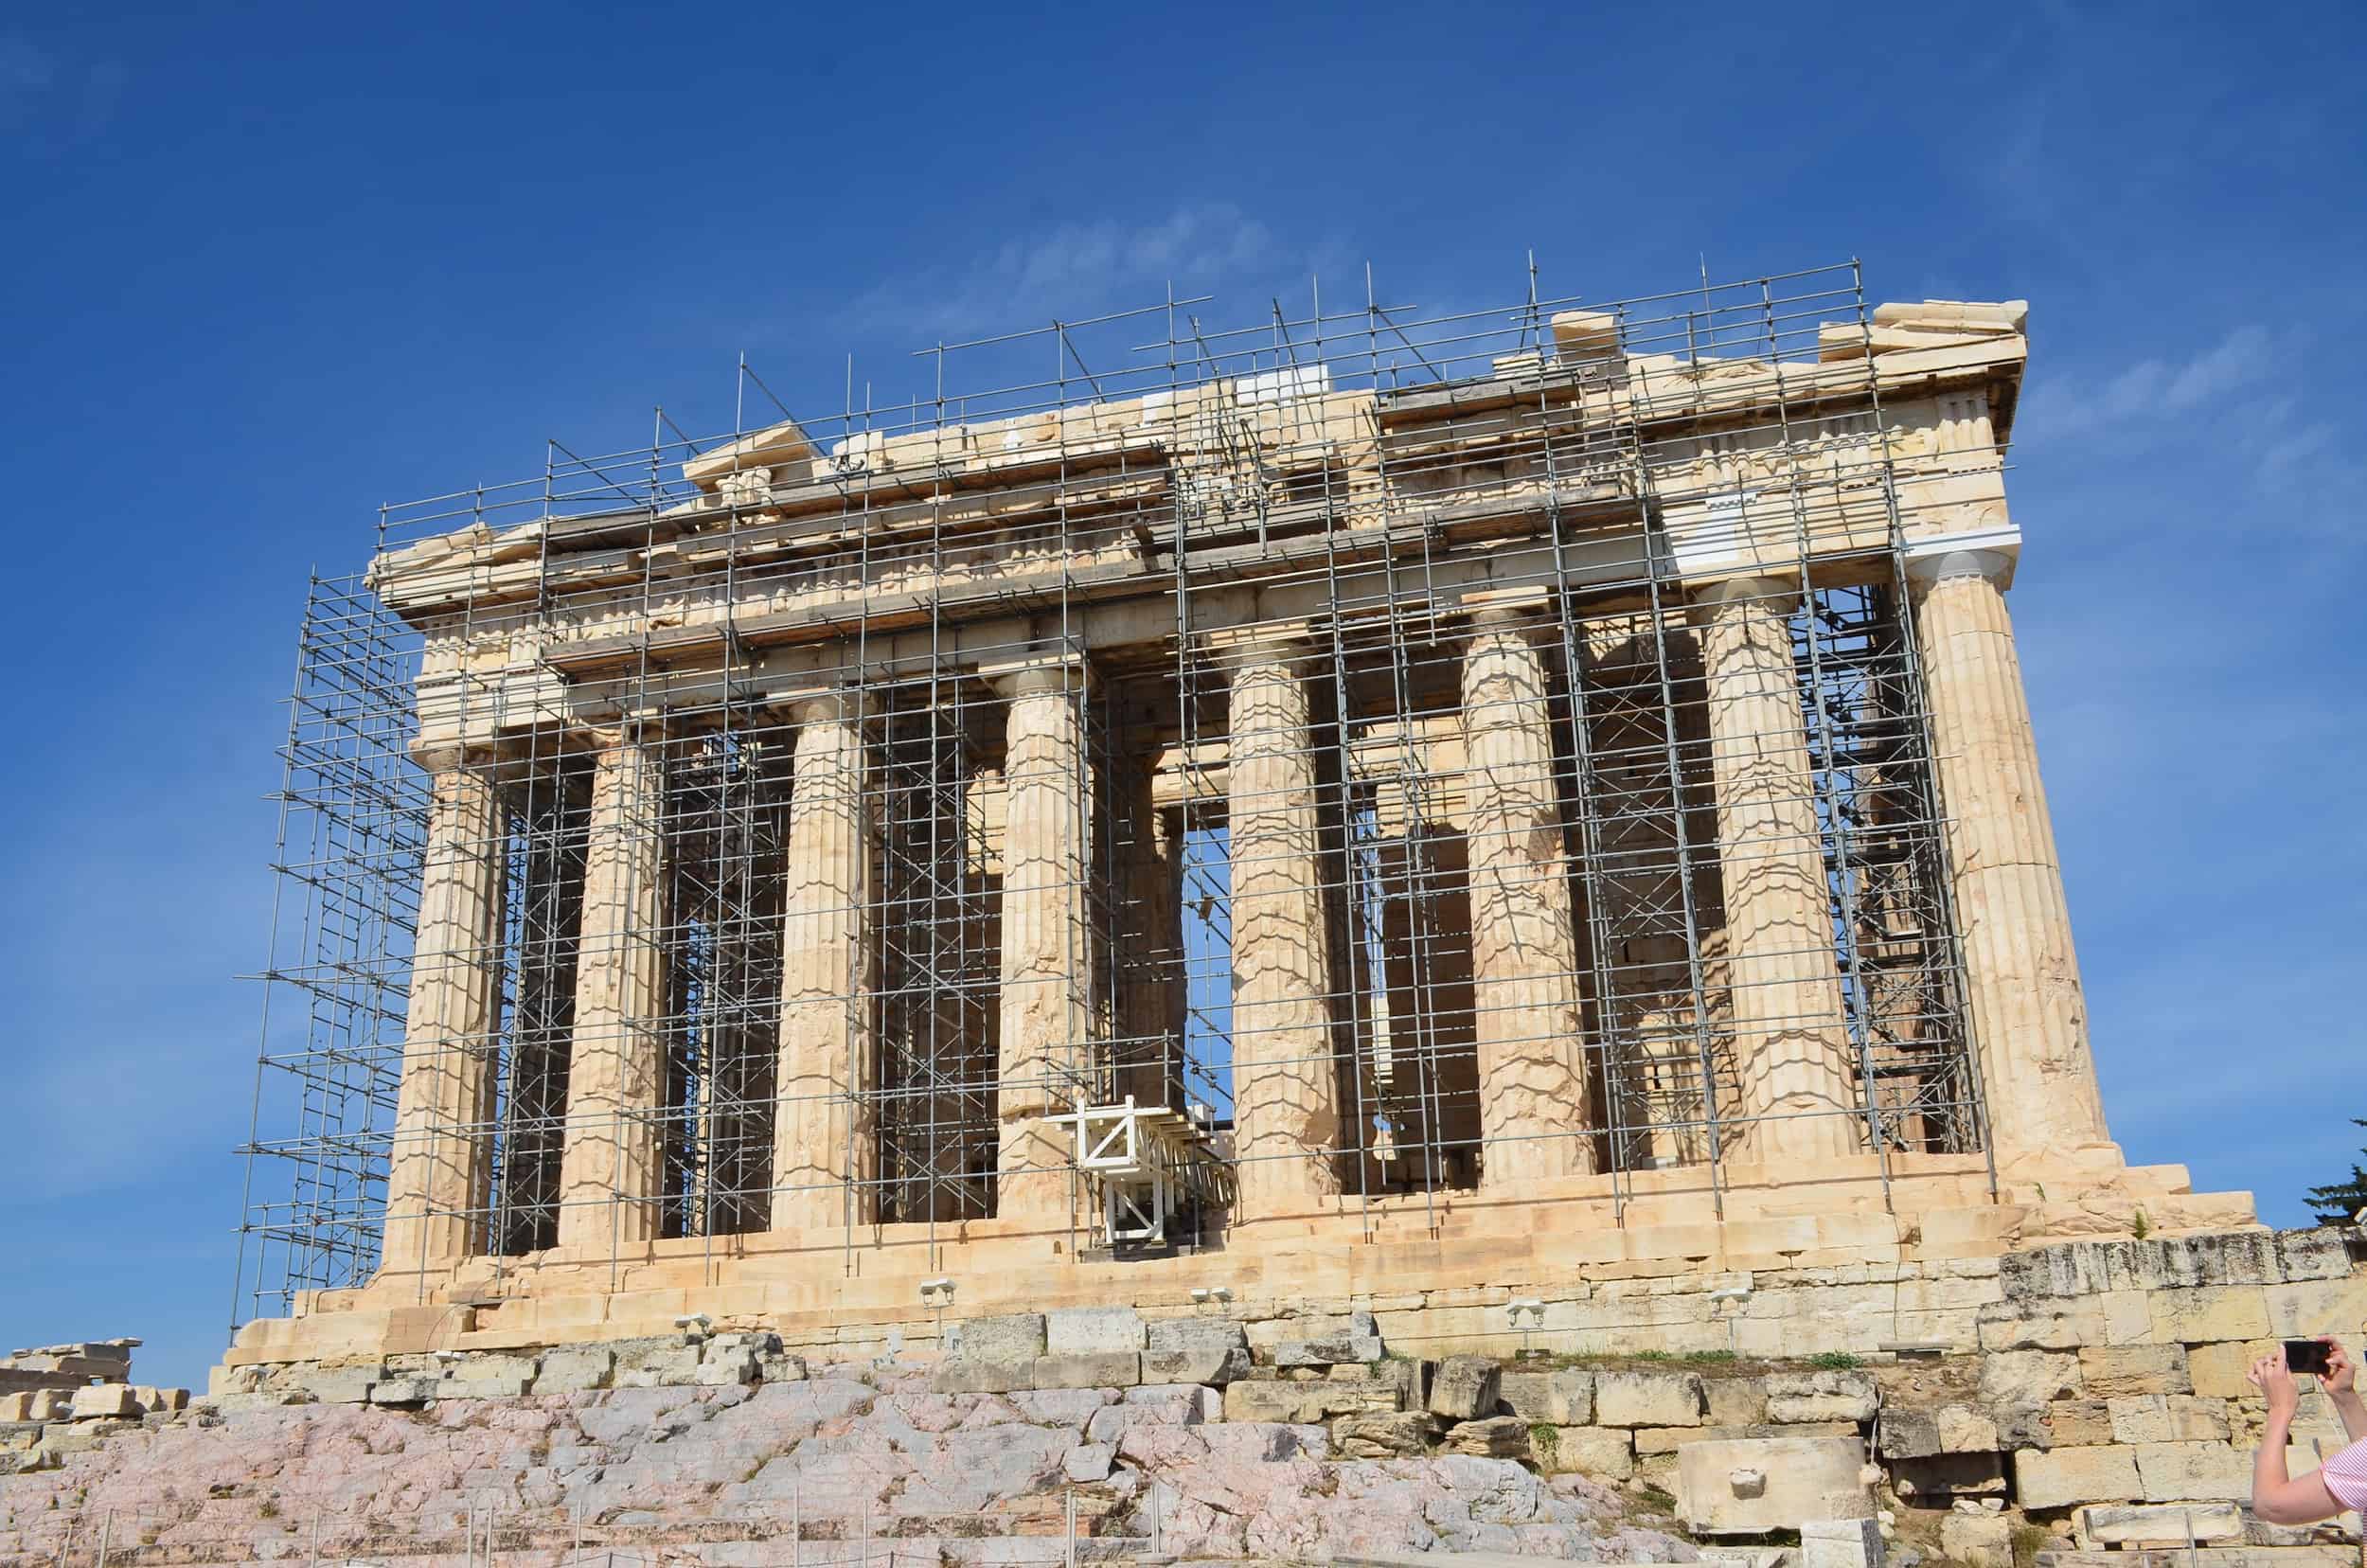 West side of the Parthenon on the Acropolis in Athens, Greece